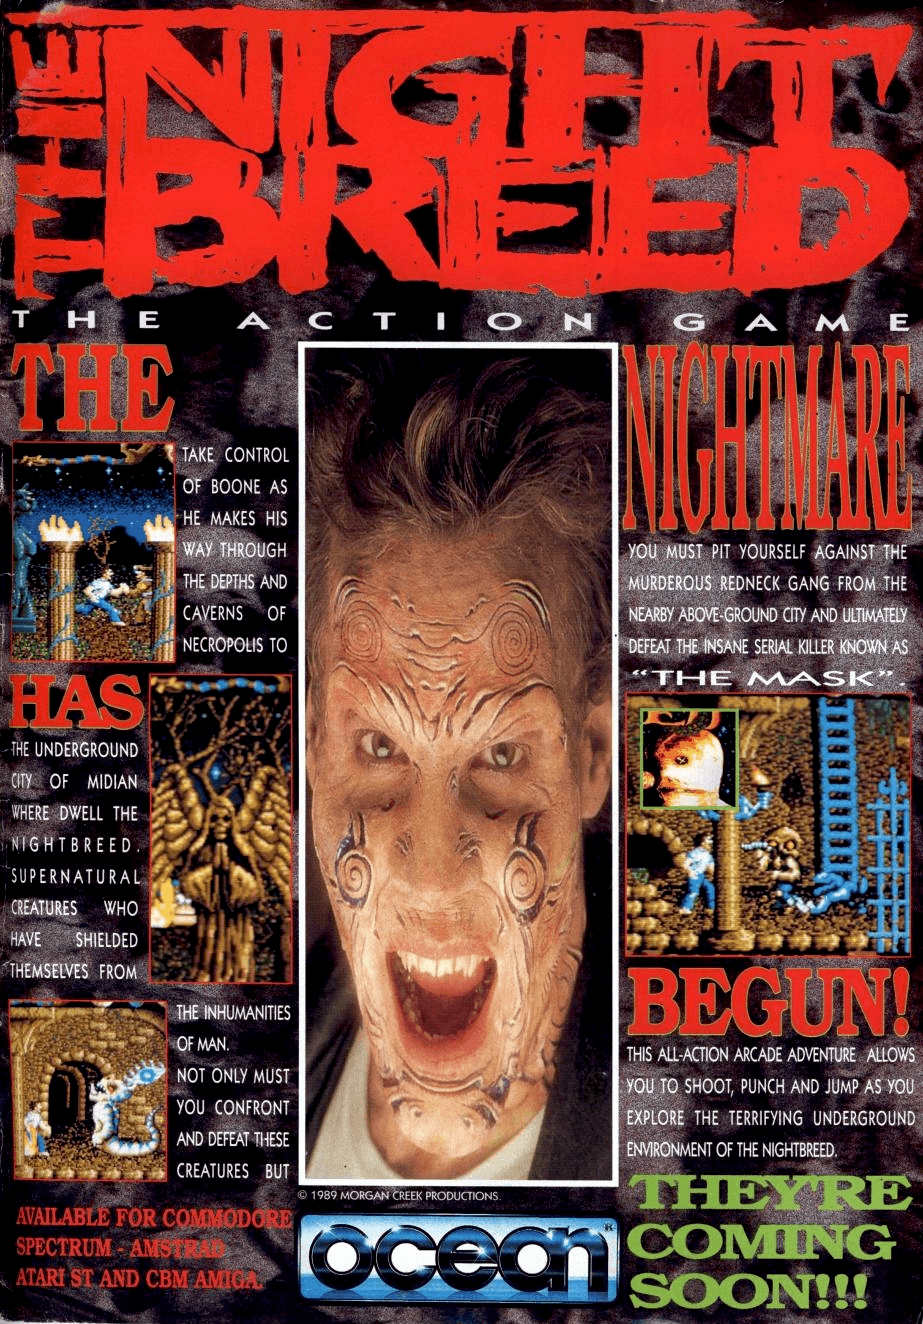 Image For Post | This is the first of a planned trilogy of games based on Clive Barker's movie Nightbreed (the second game was Nightbreed: The Interactive Movie - https://imgchest.com/p/gm9yxr6yqna - and the third game was never released). 

This is a side-scrolling action game where Boone must fight his way through Midian, fighting the Sons of the Free and the Berserkers.